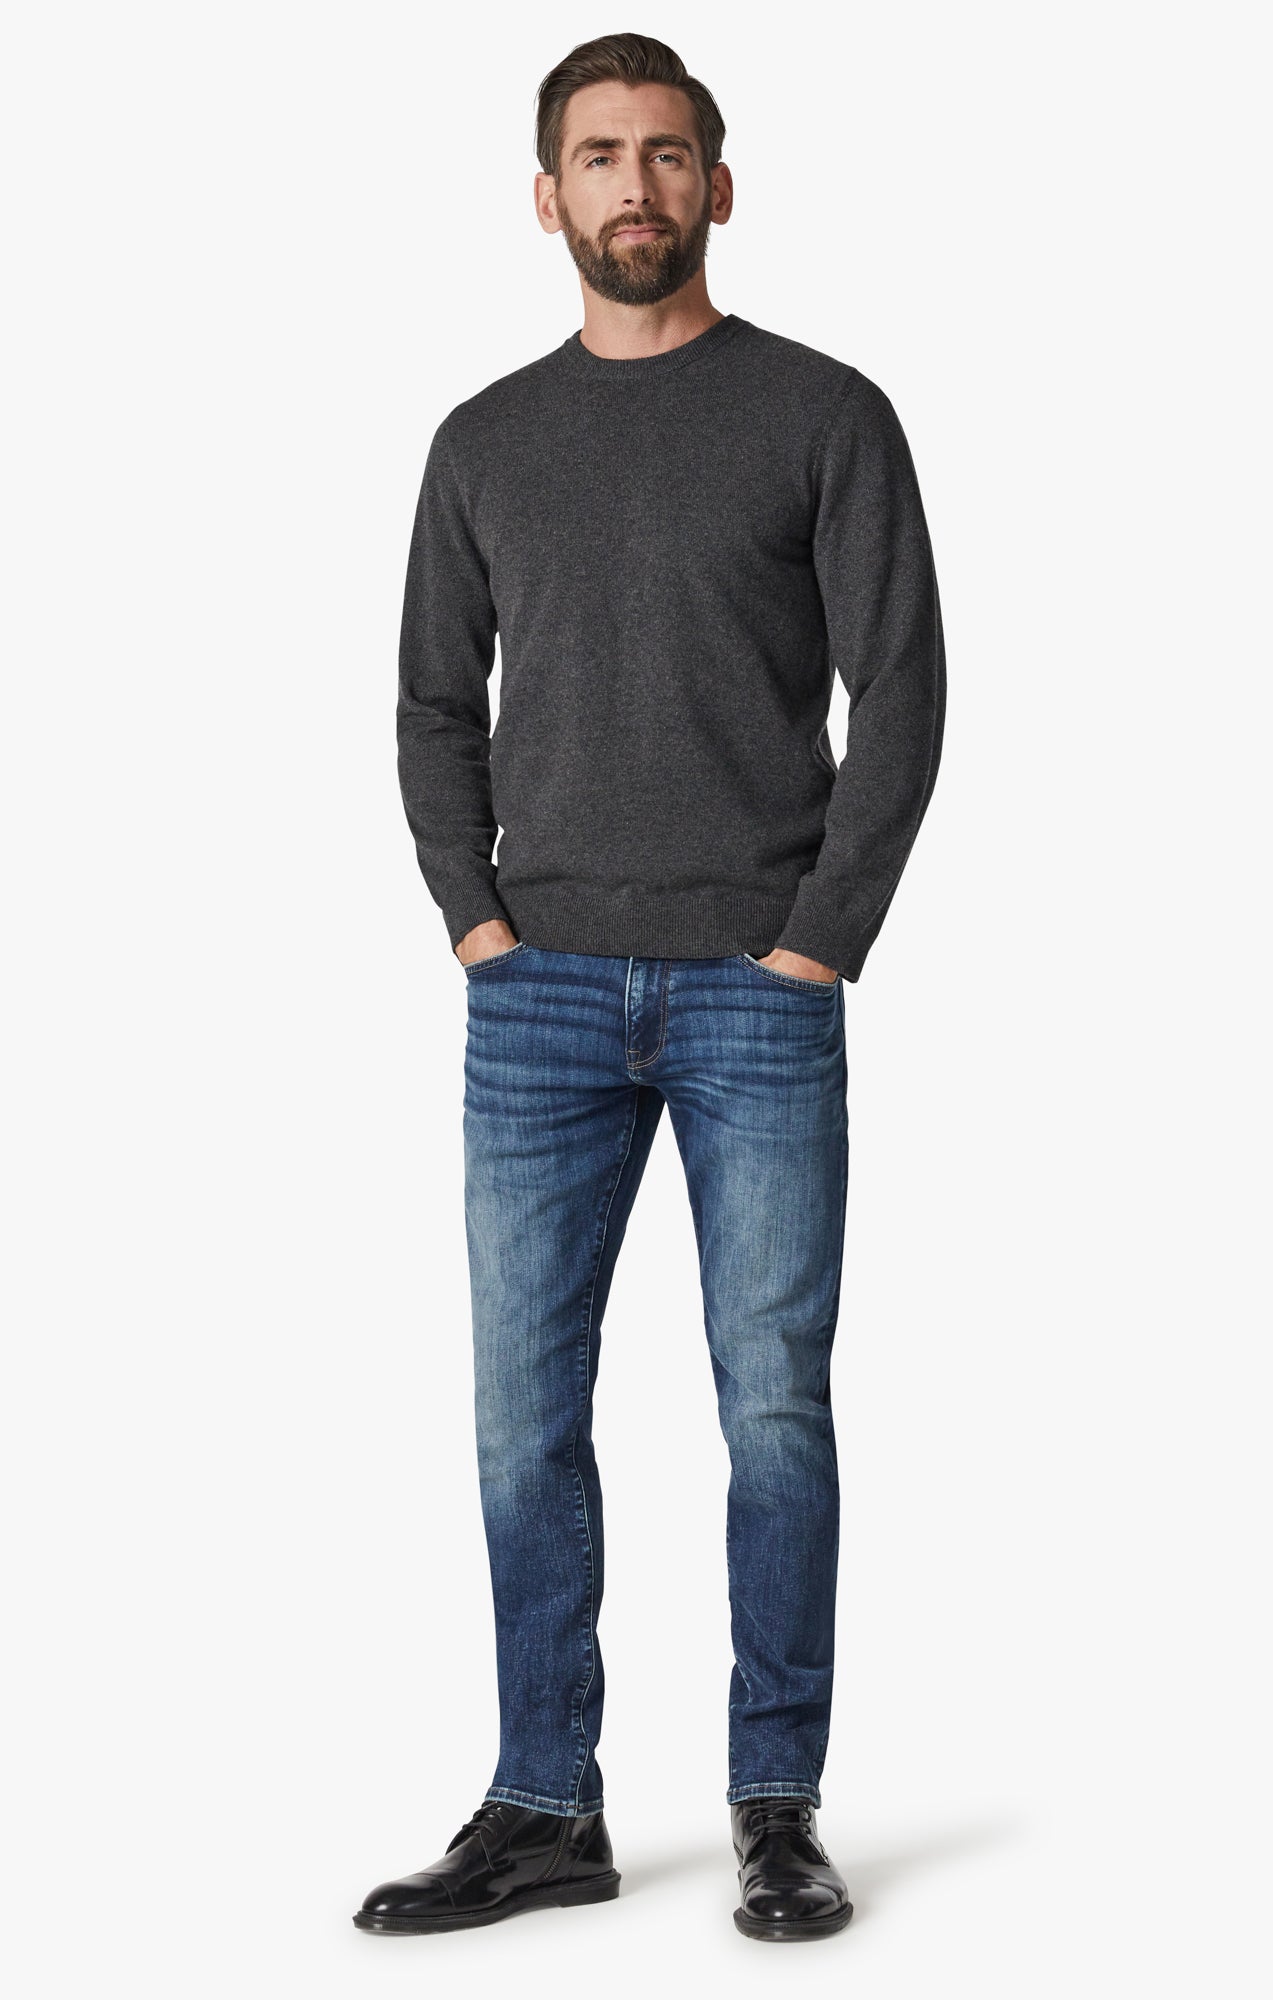 Cashmere Crew Neck Sweater In Charcoal Image 5